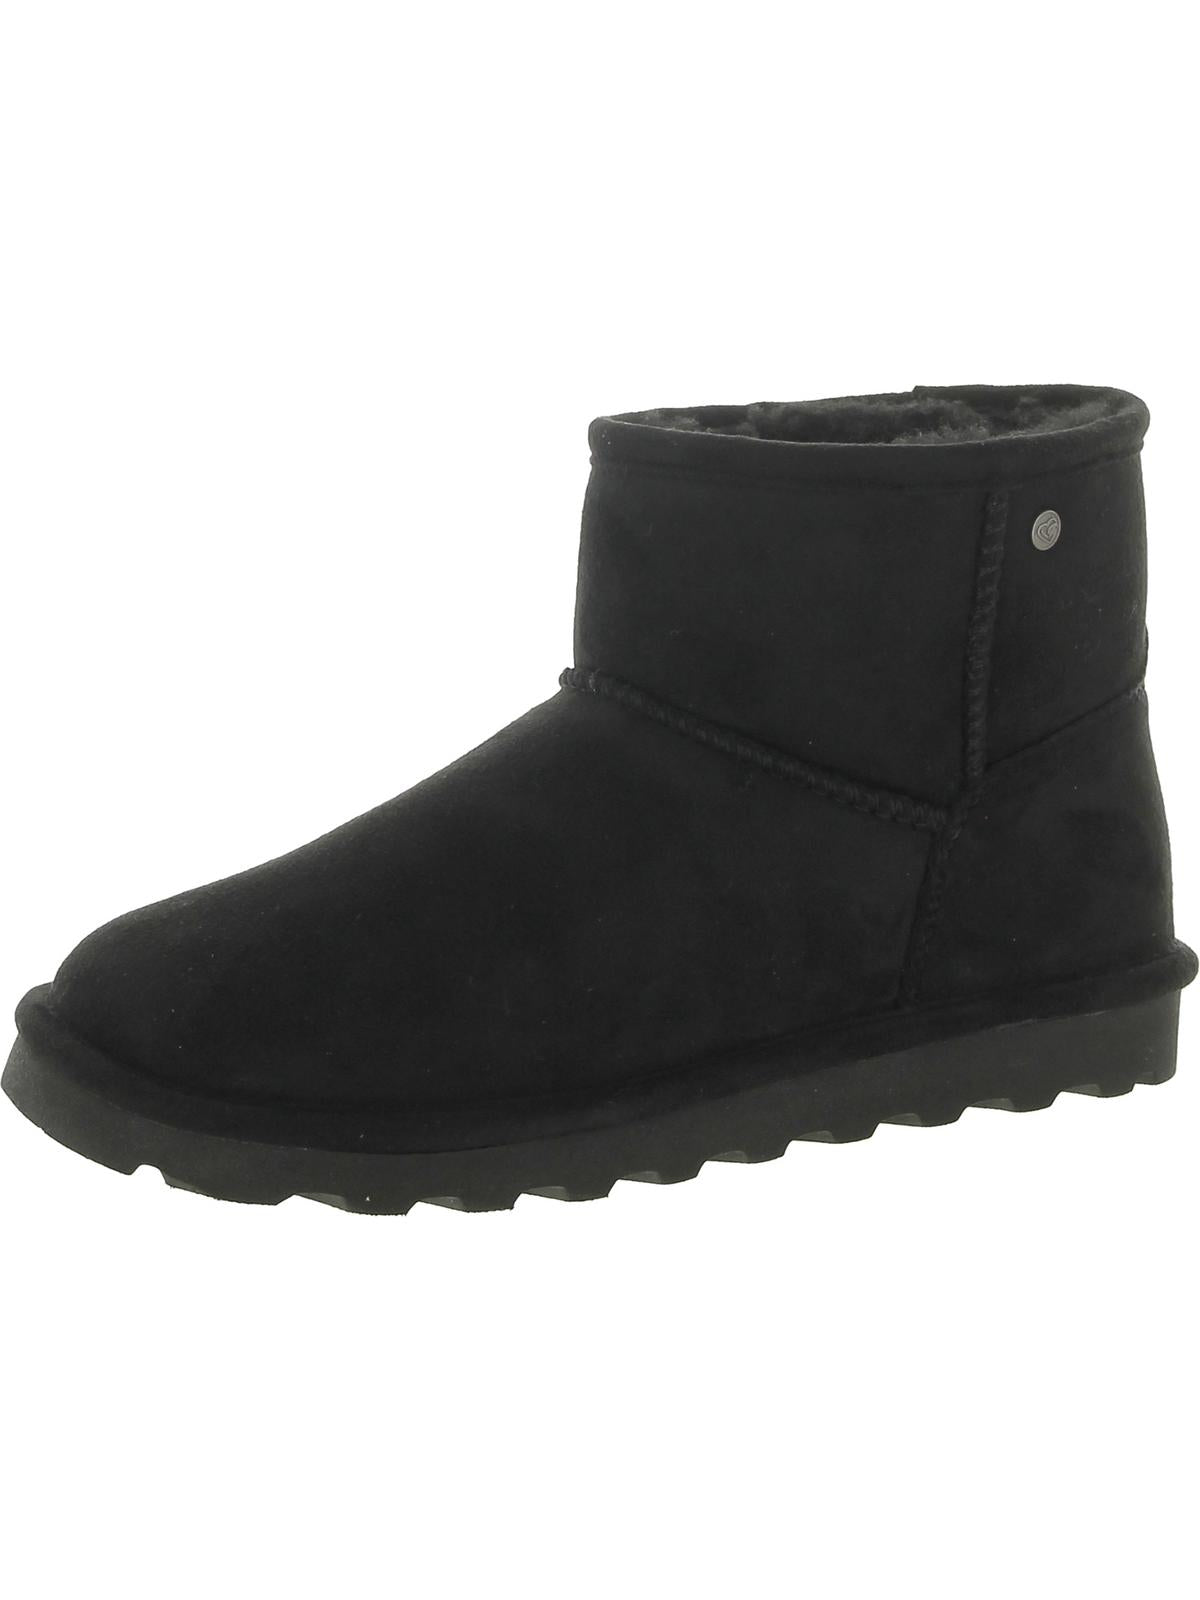 Shop Bearpaw Alyssa Vegan Womens Faux Suede Cold Weather Shearling Boots In Black